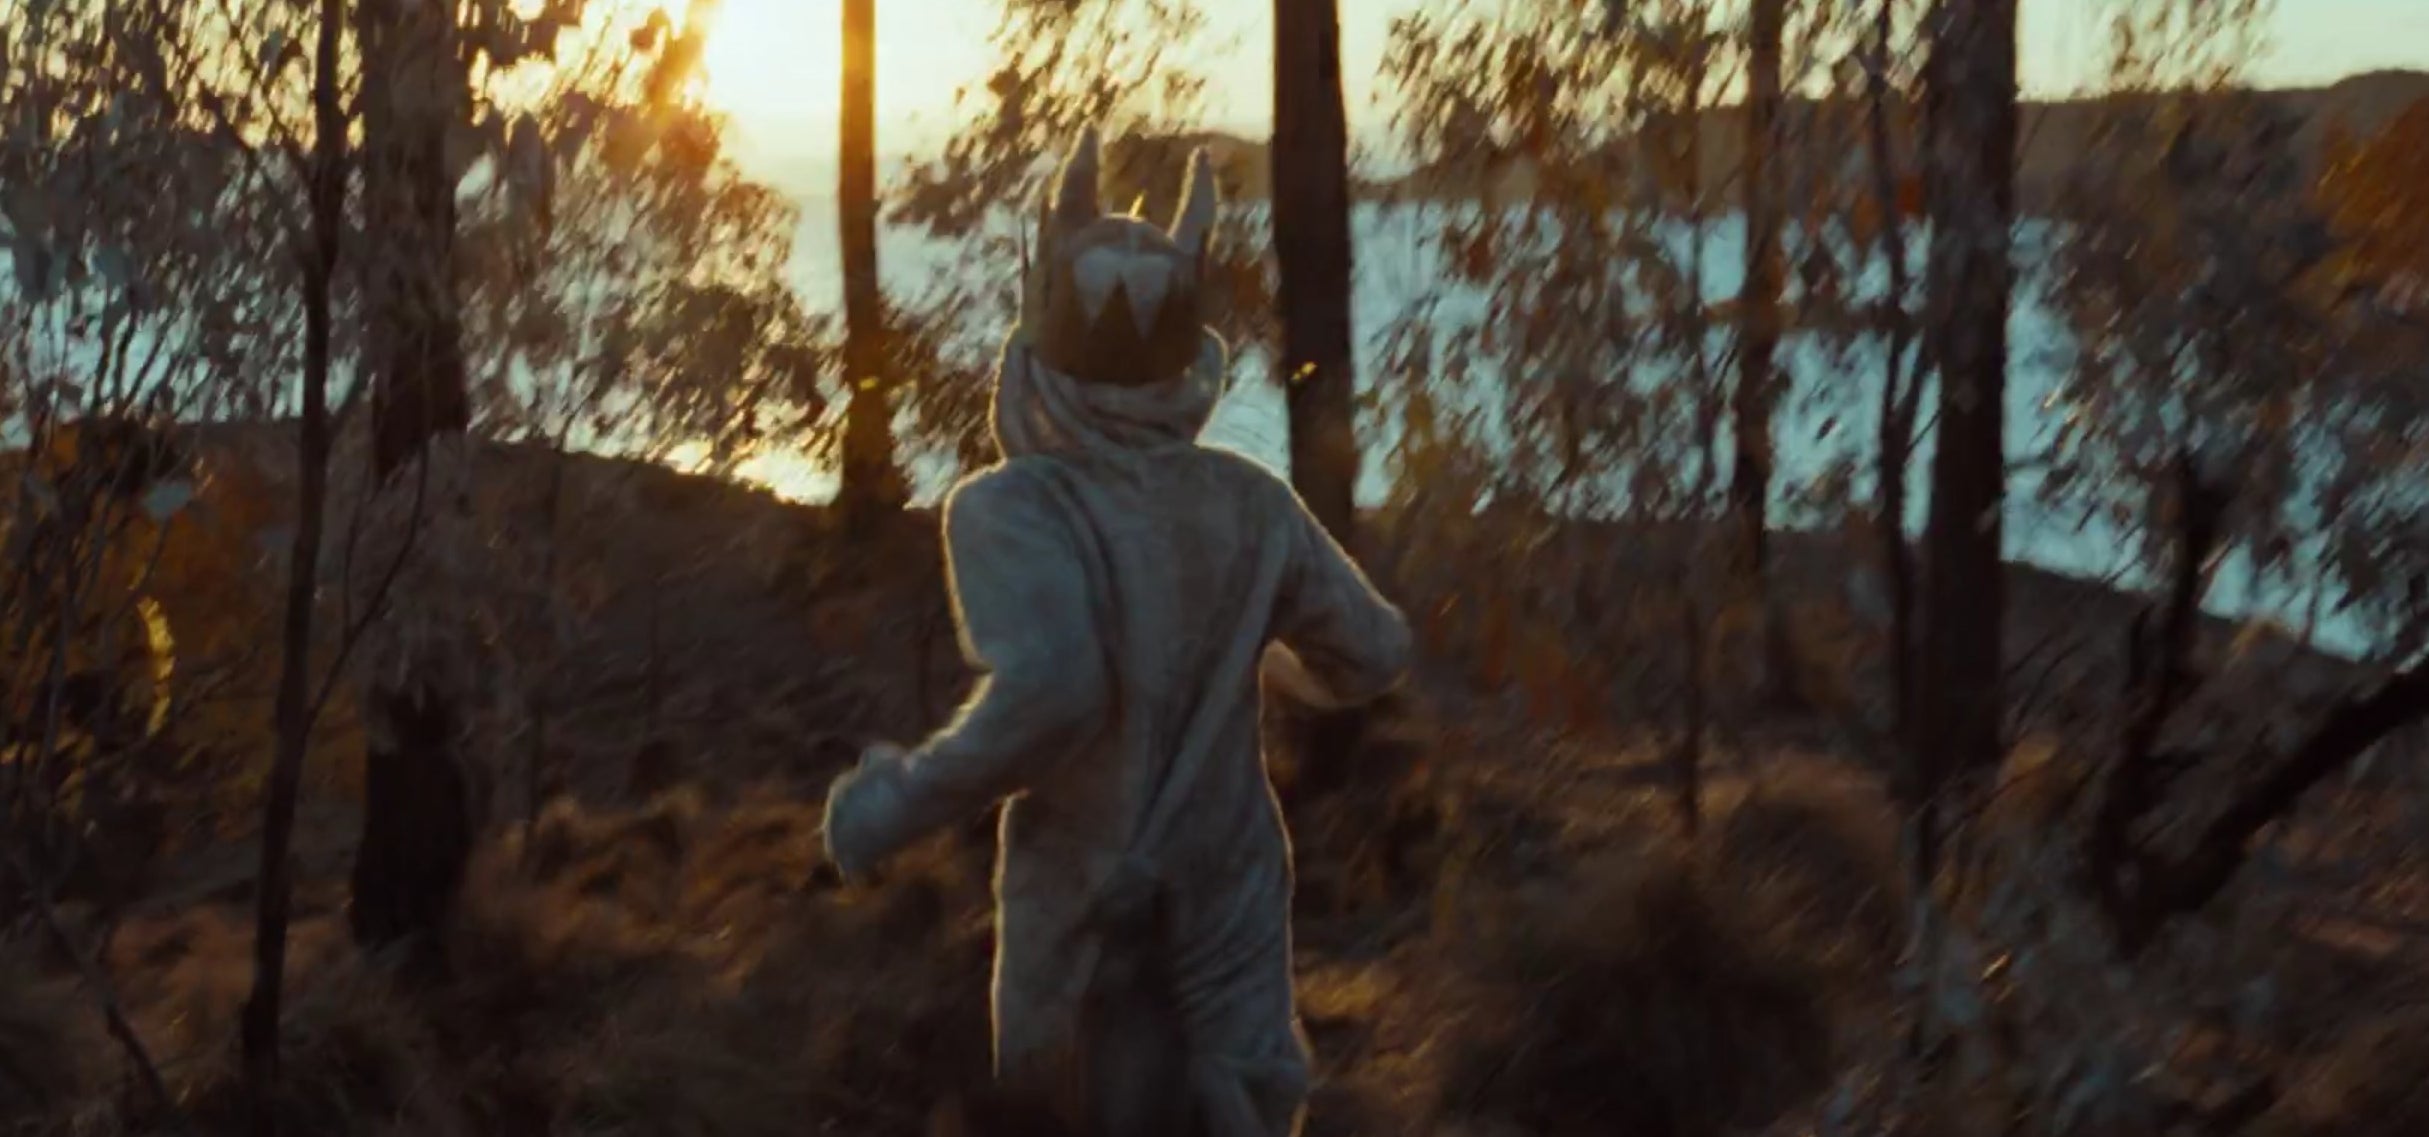 A boy in a monster costume running through the woods